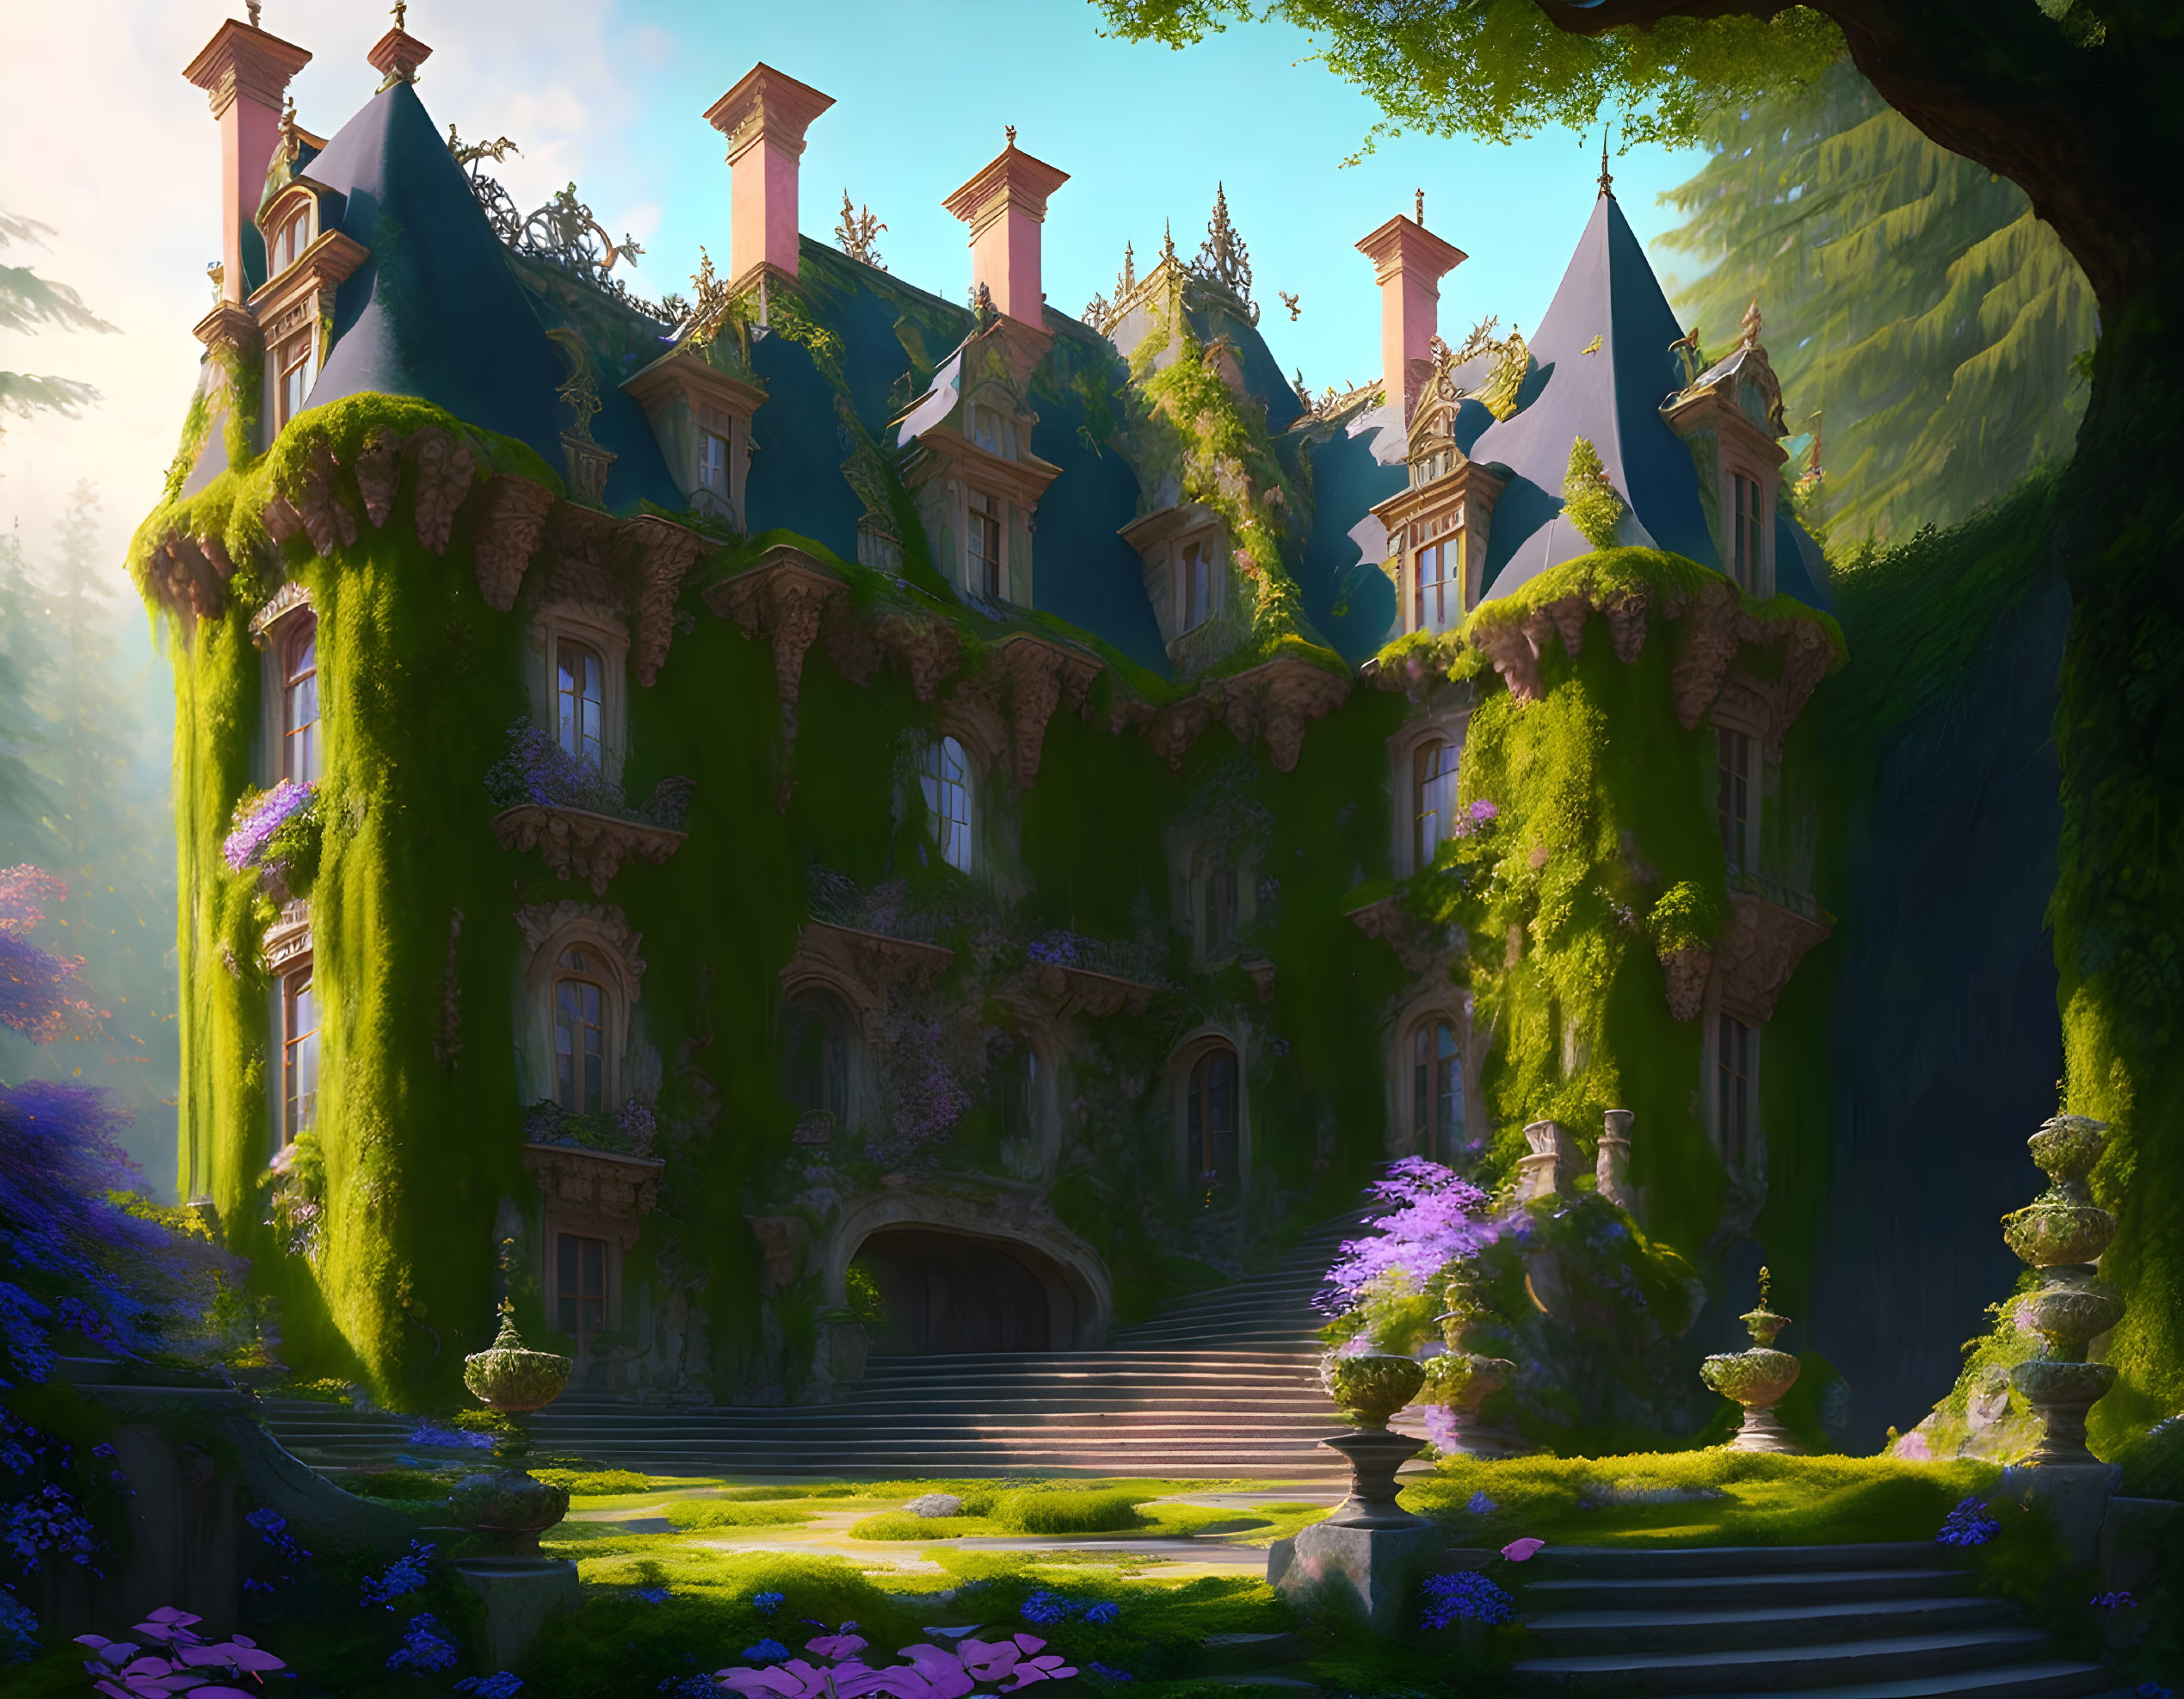 Castle surrounded by lush greenery and vibrant flora in warm sunlight.